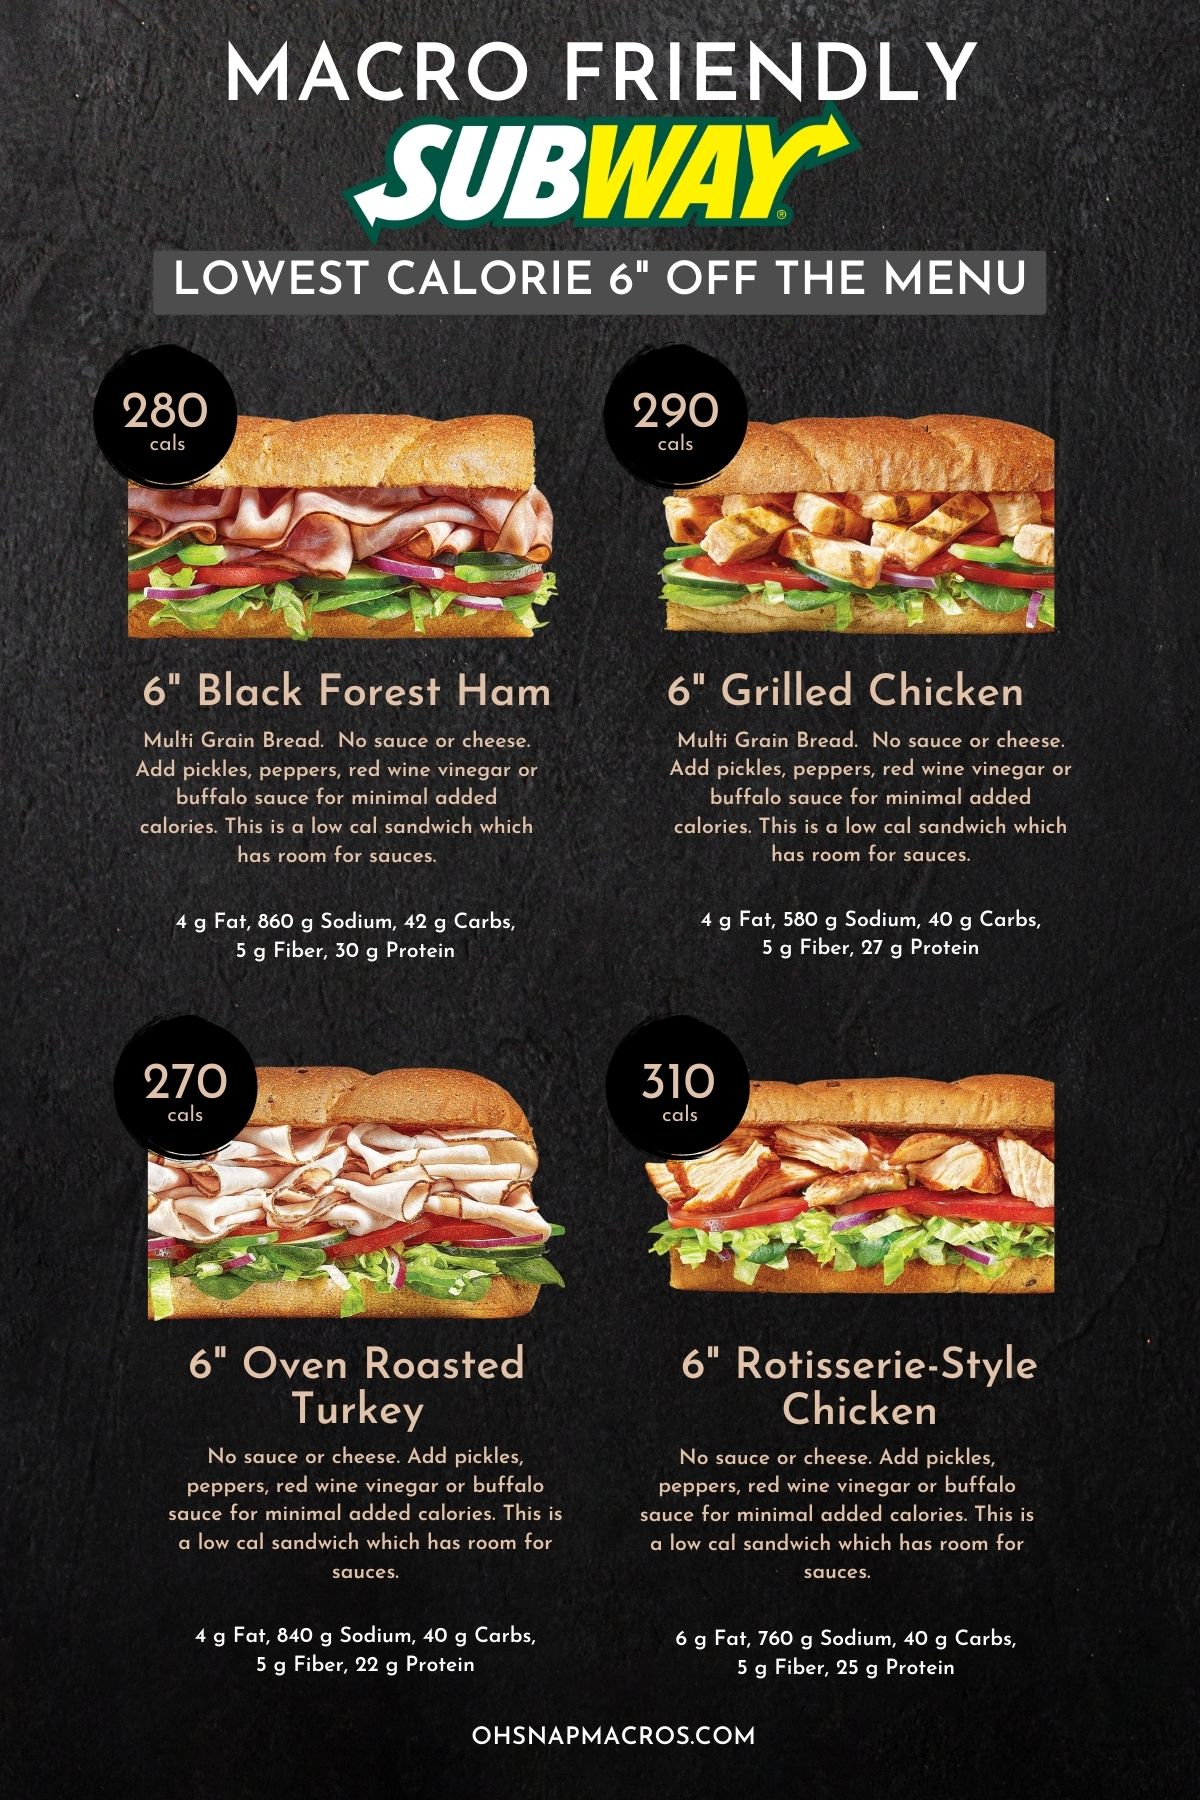 Graphic of lowest calorie six-inch subs: black forest ham, grilled chicken, oven-roasted turkey, rotisserie-style chicken.